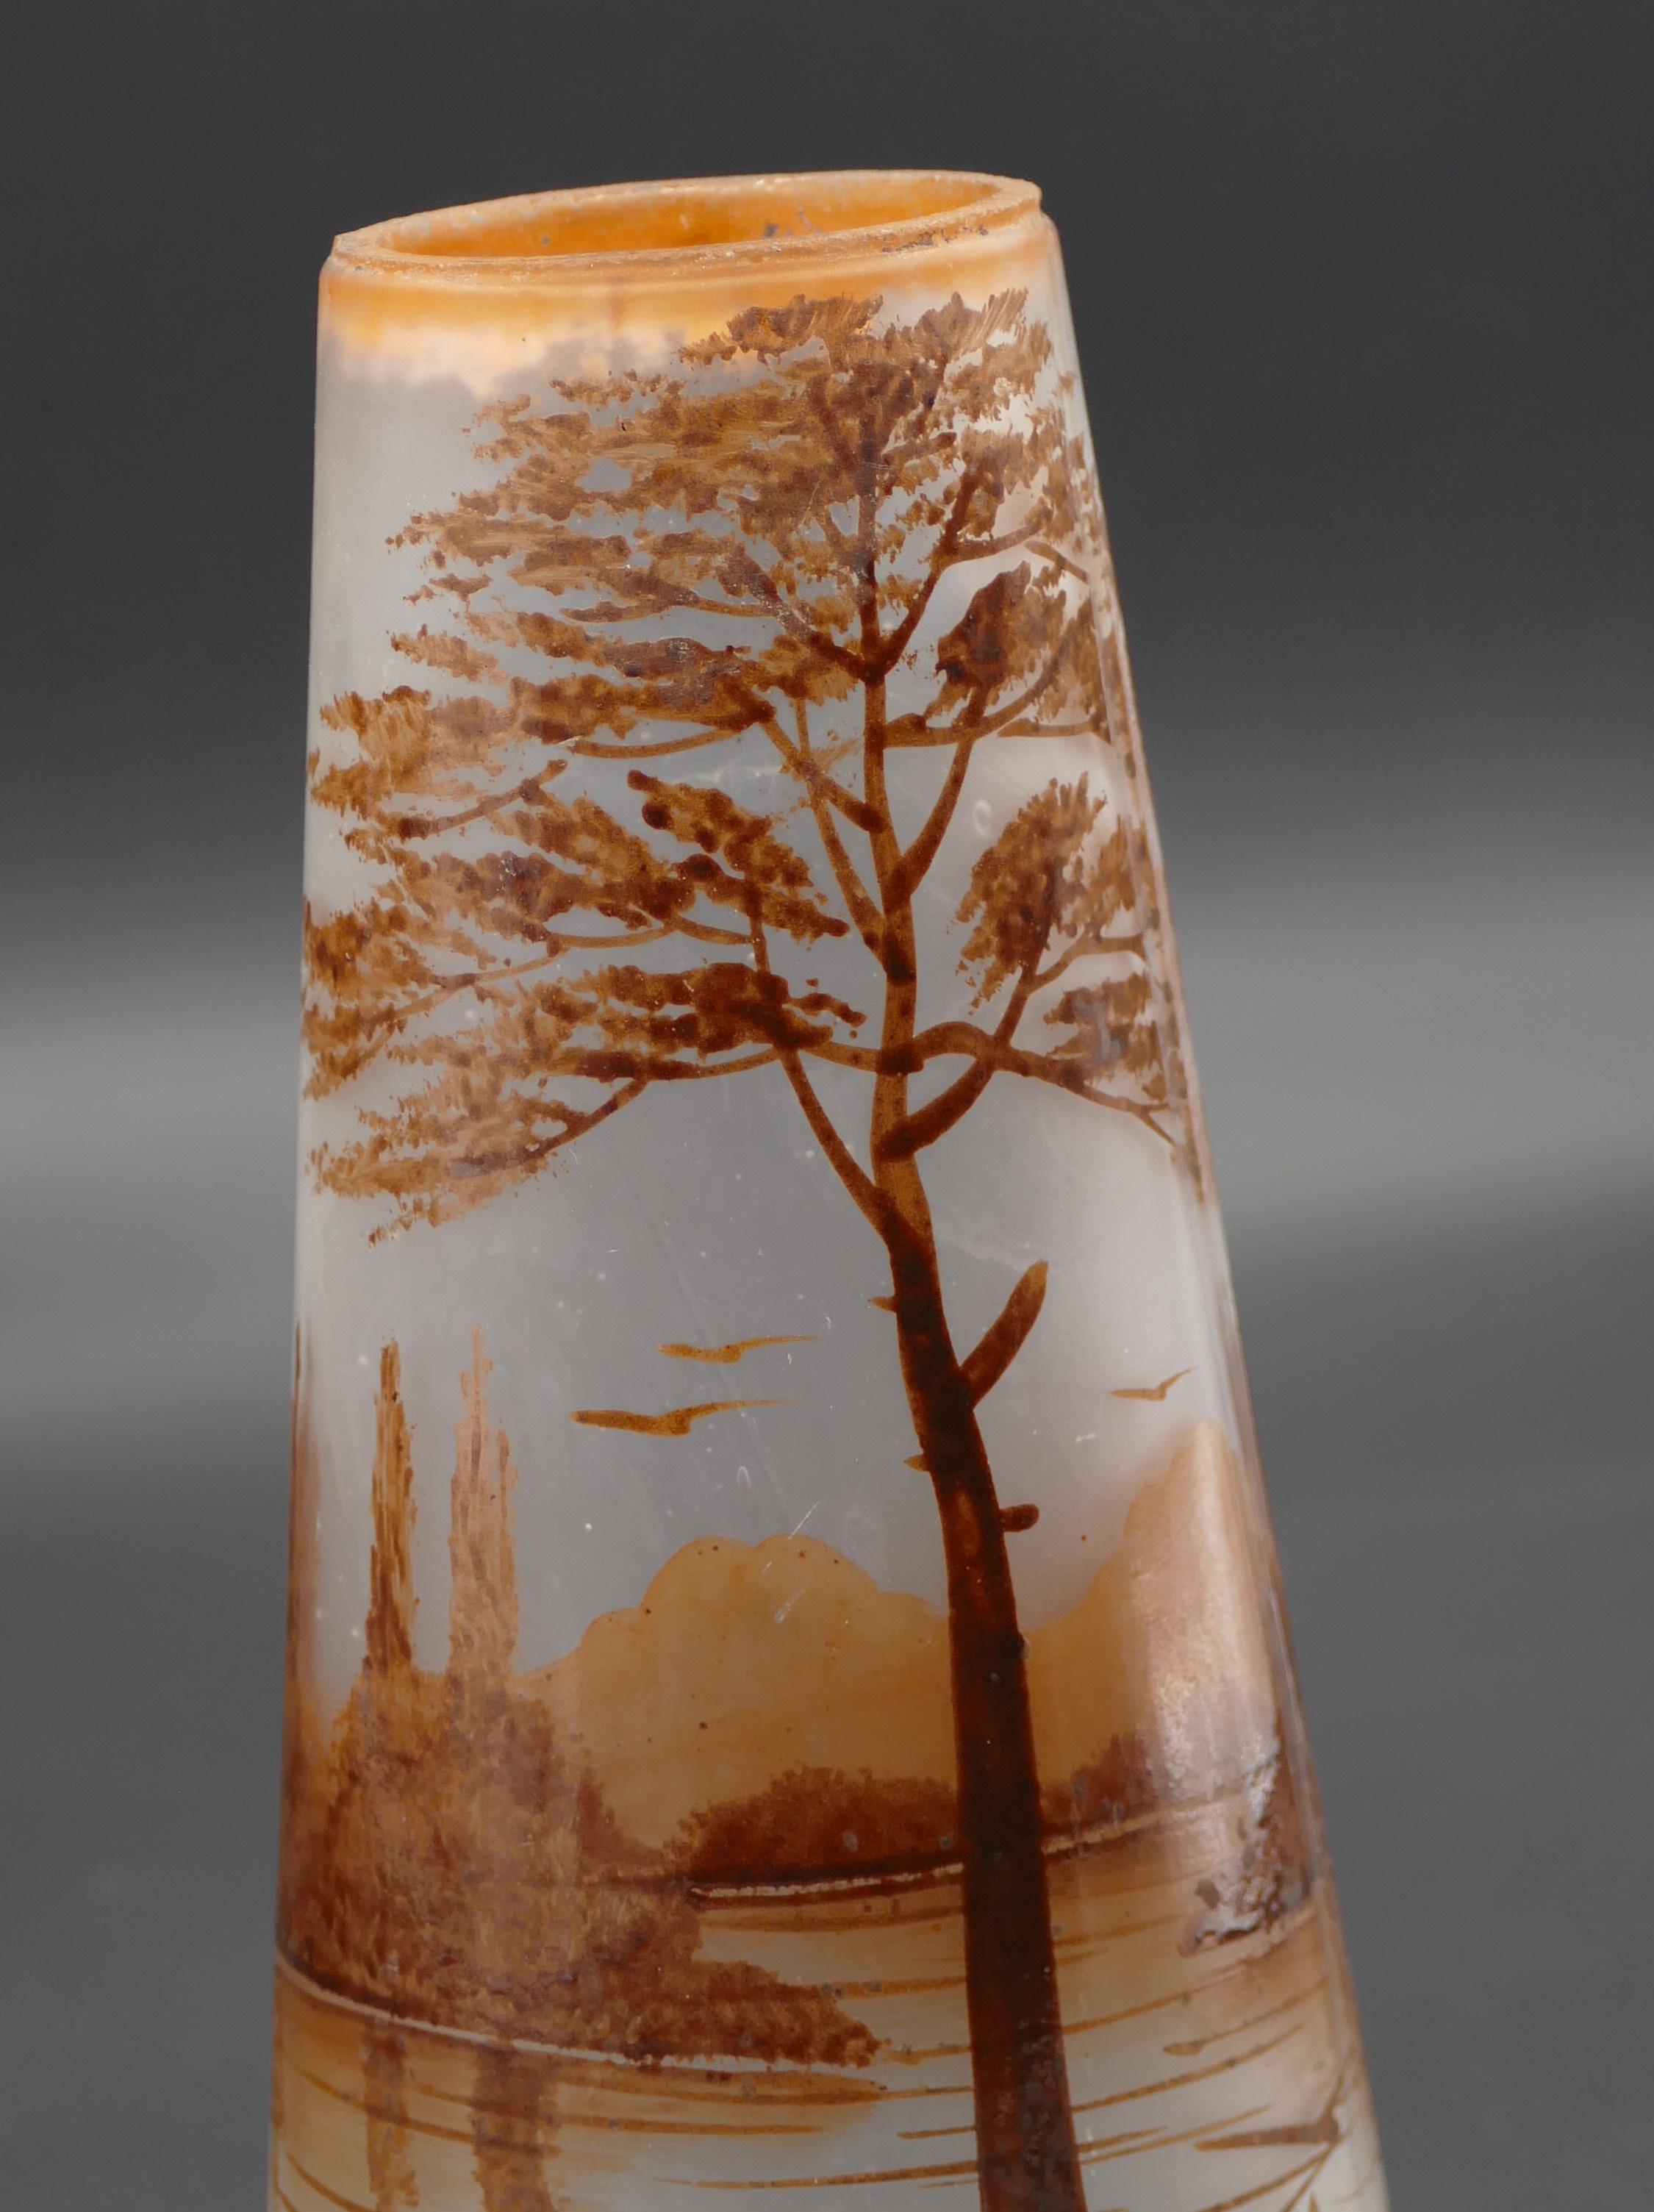 French Art Nouveau Marine Escape Vase by Joma, Montreuil, France, Early 1900 For Sale